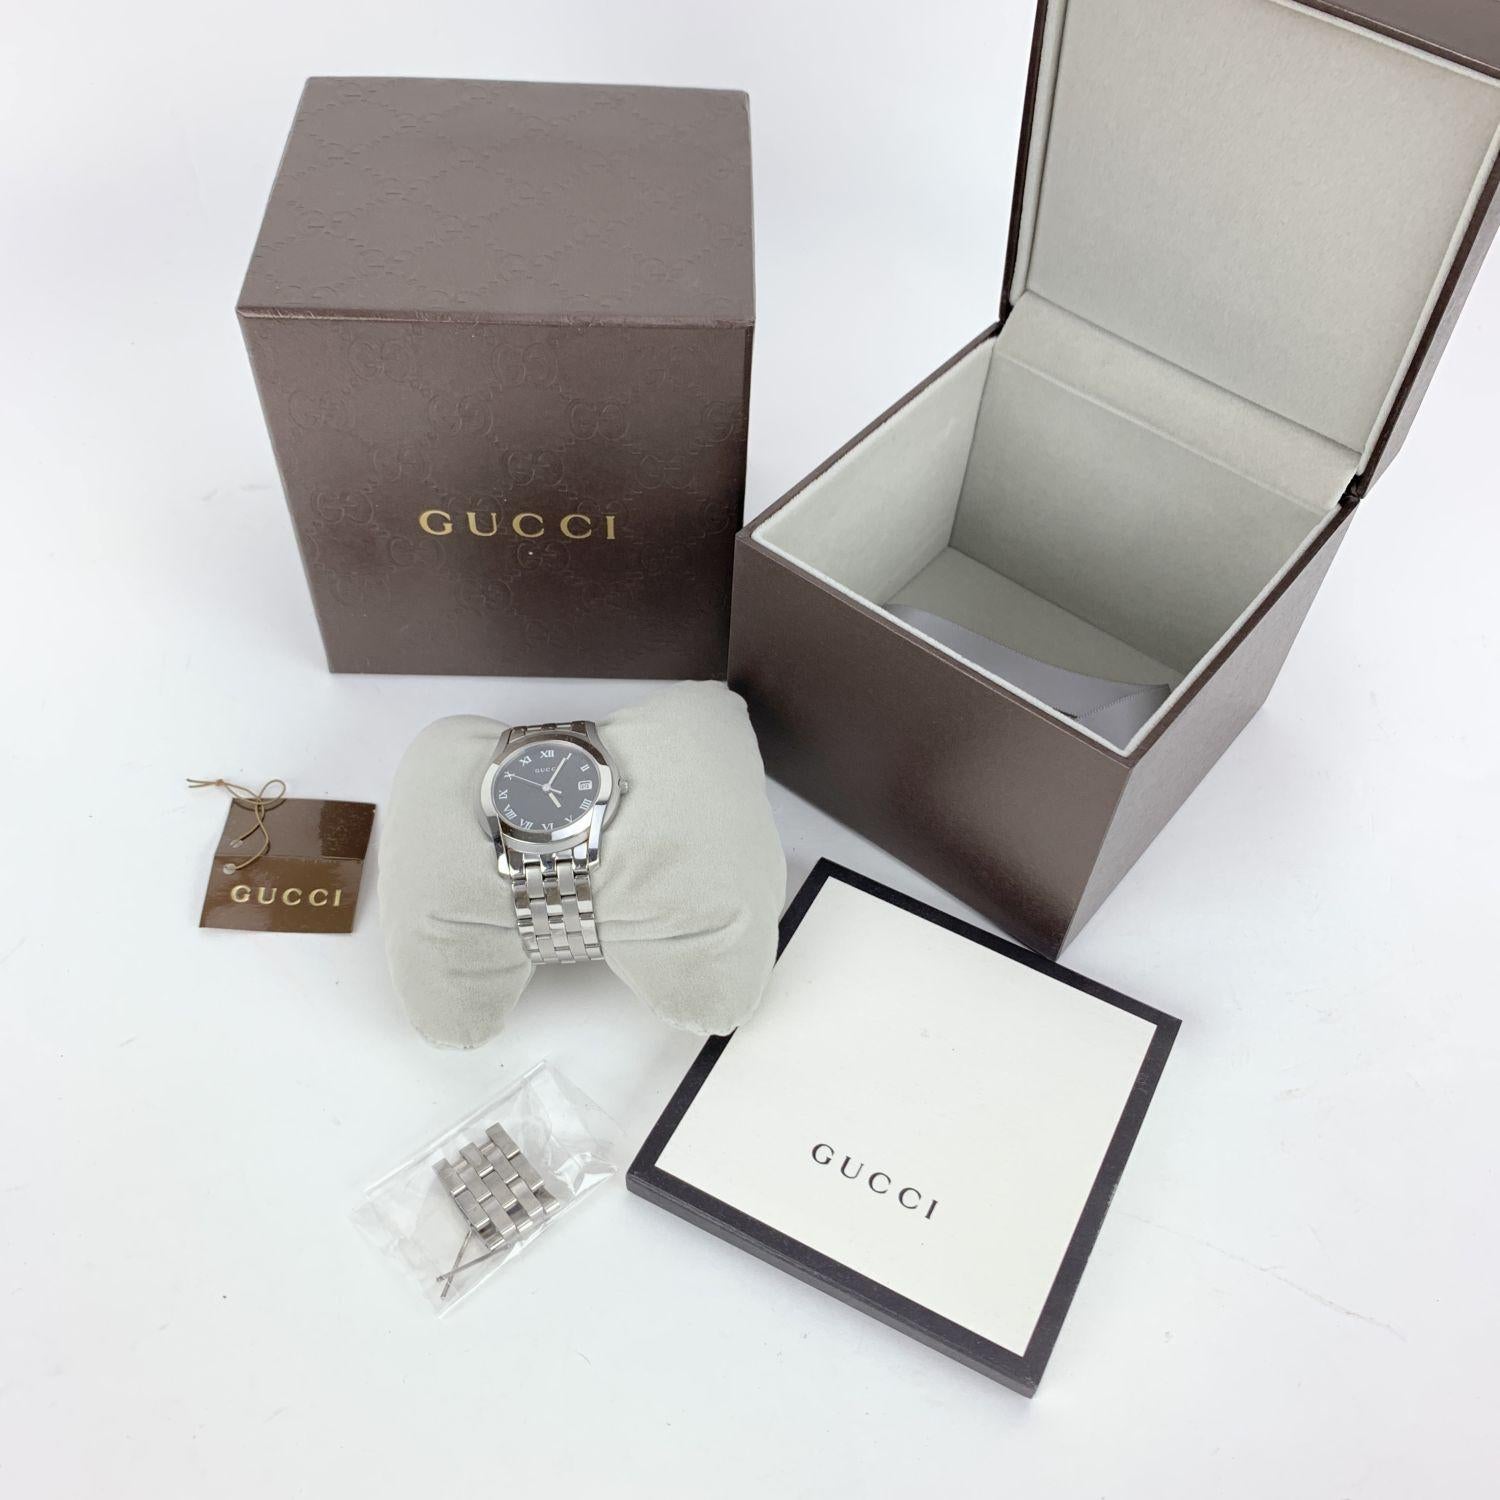 Gucci Silver Stainless Steel Mod 5500 M Unisex Wrist Watch Black Dial 1